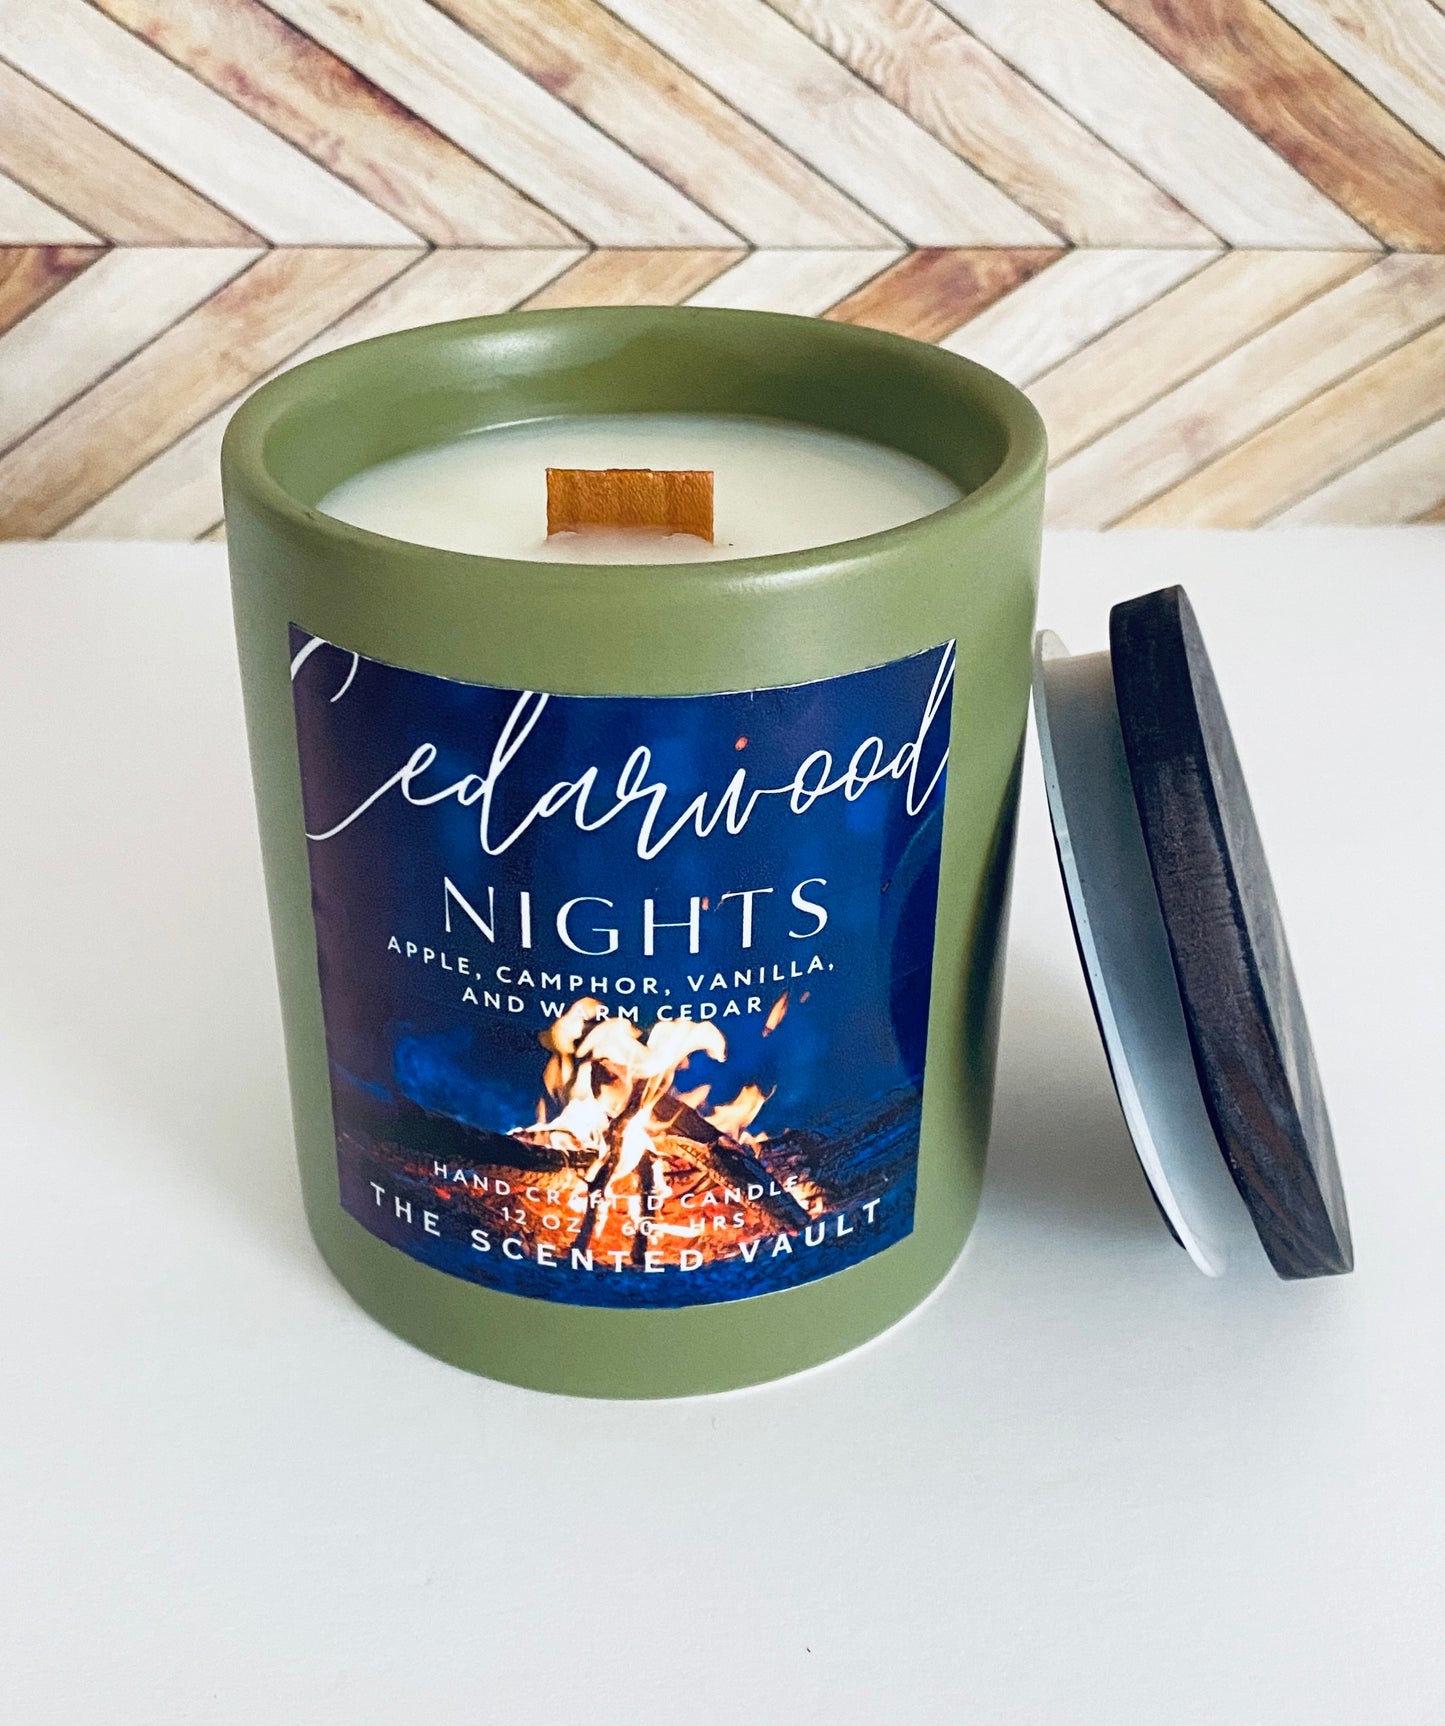 Cedarwood Nights Scented Candle